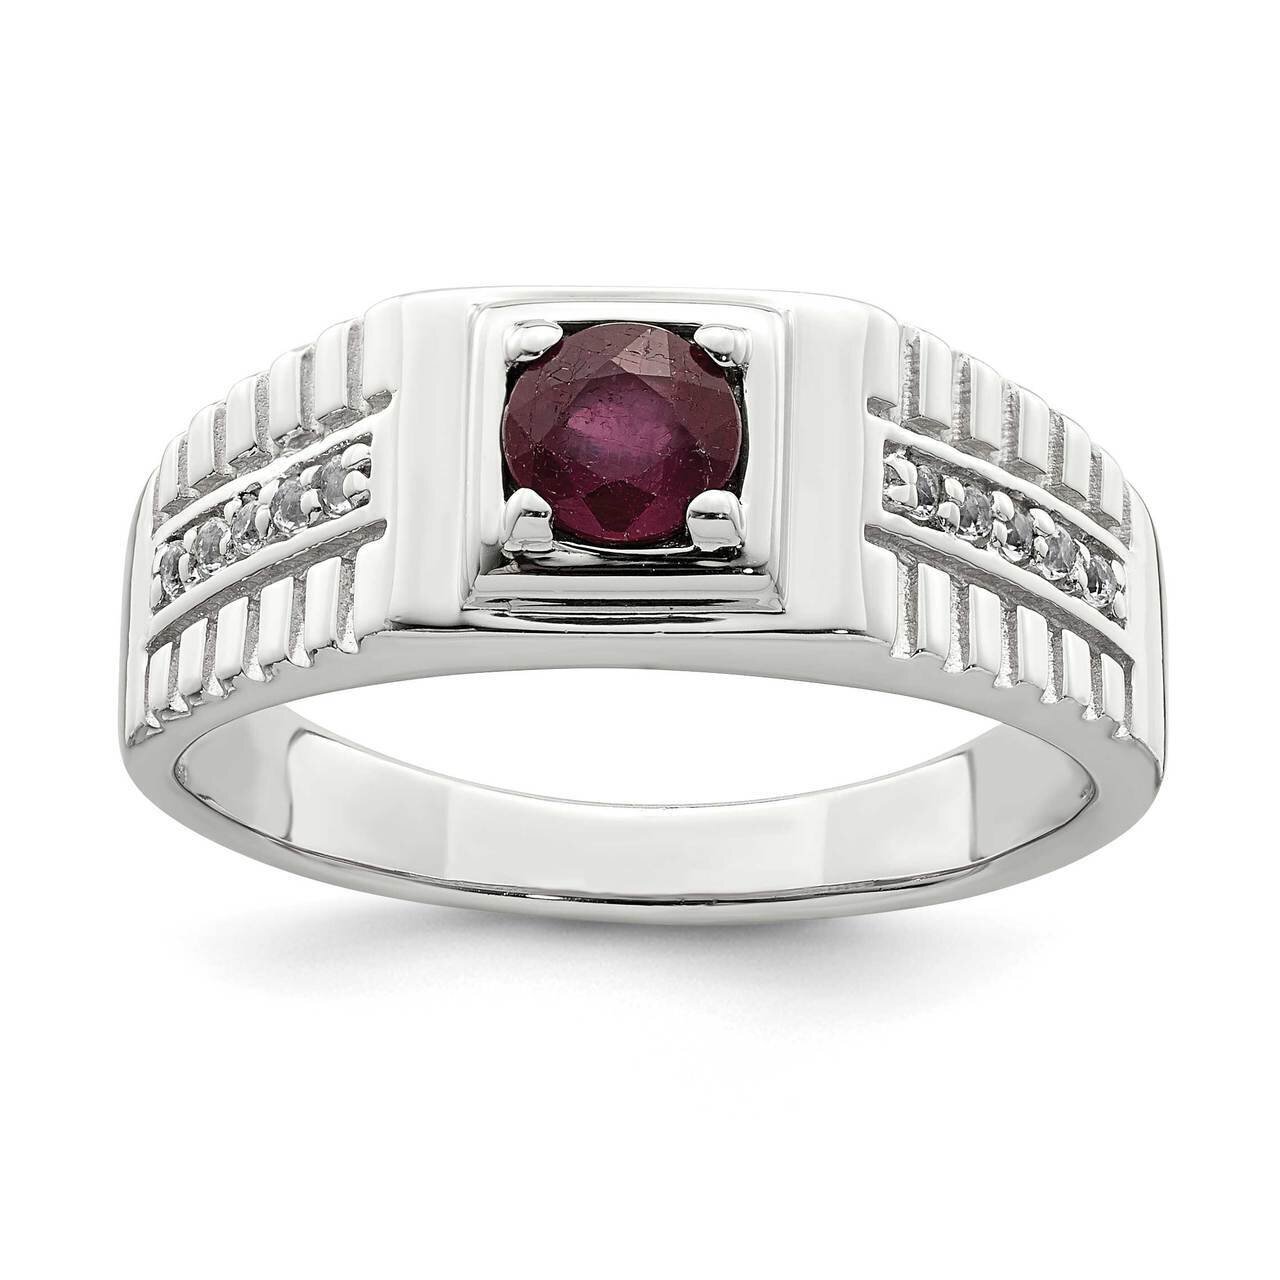 Men's African Ruby and White Topaz Ring Sterling Silver QR6843